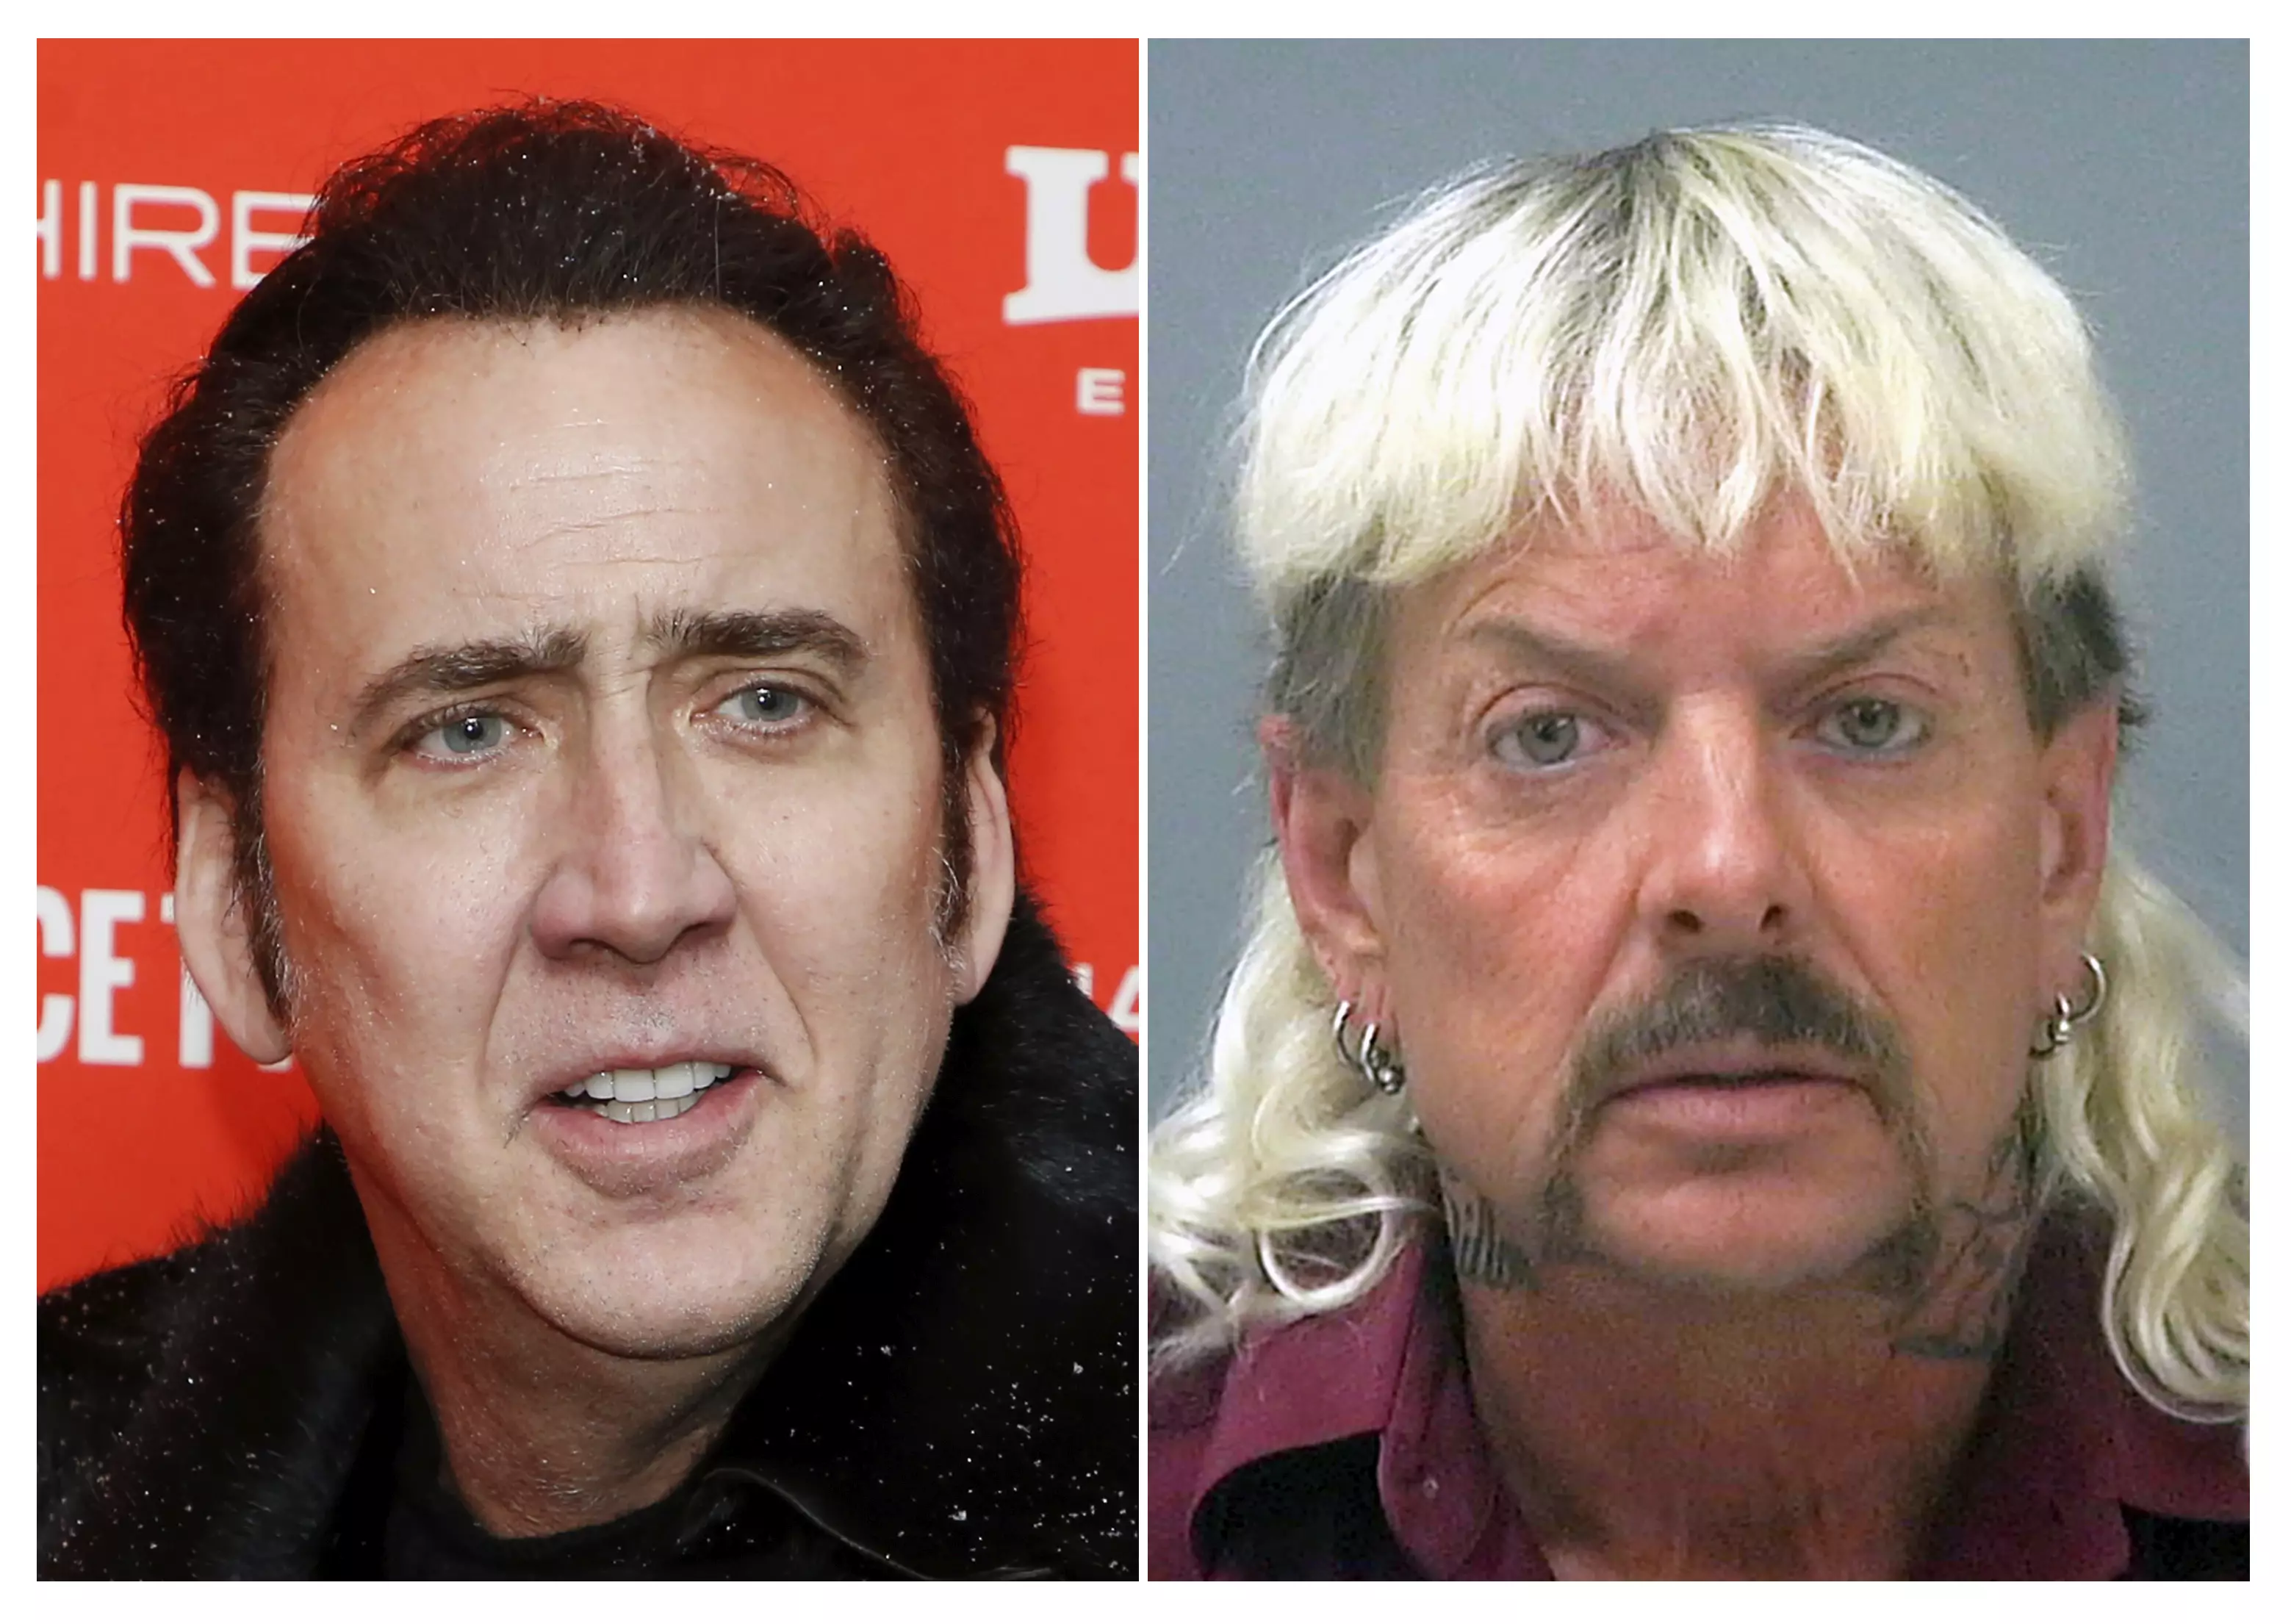 Nicolas Cage could be set to star as Joe Exotic.